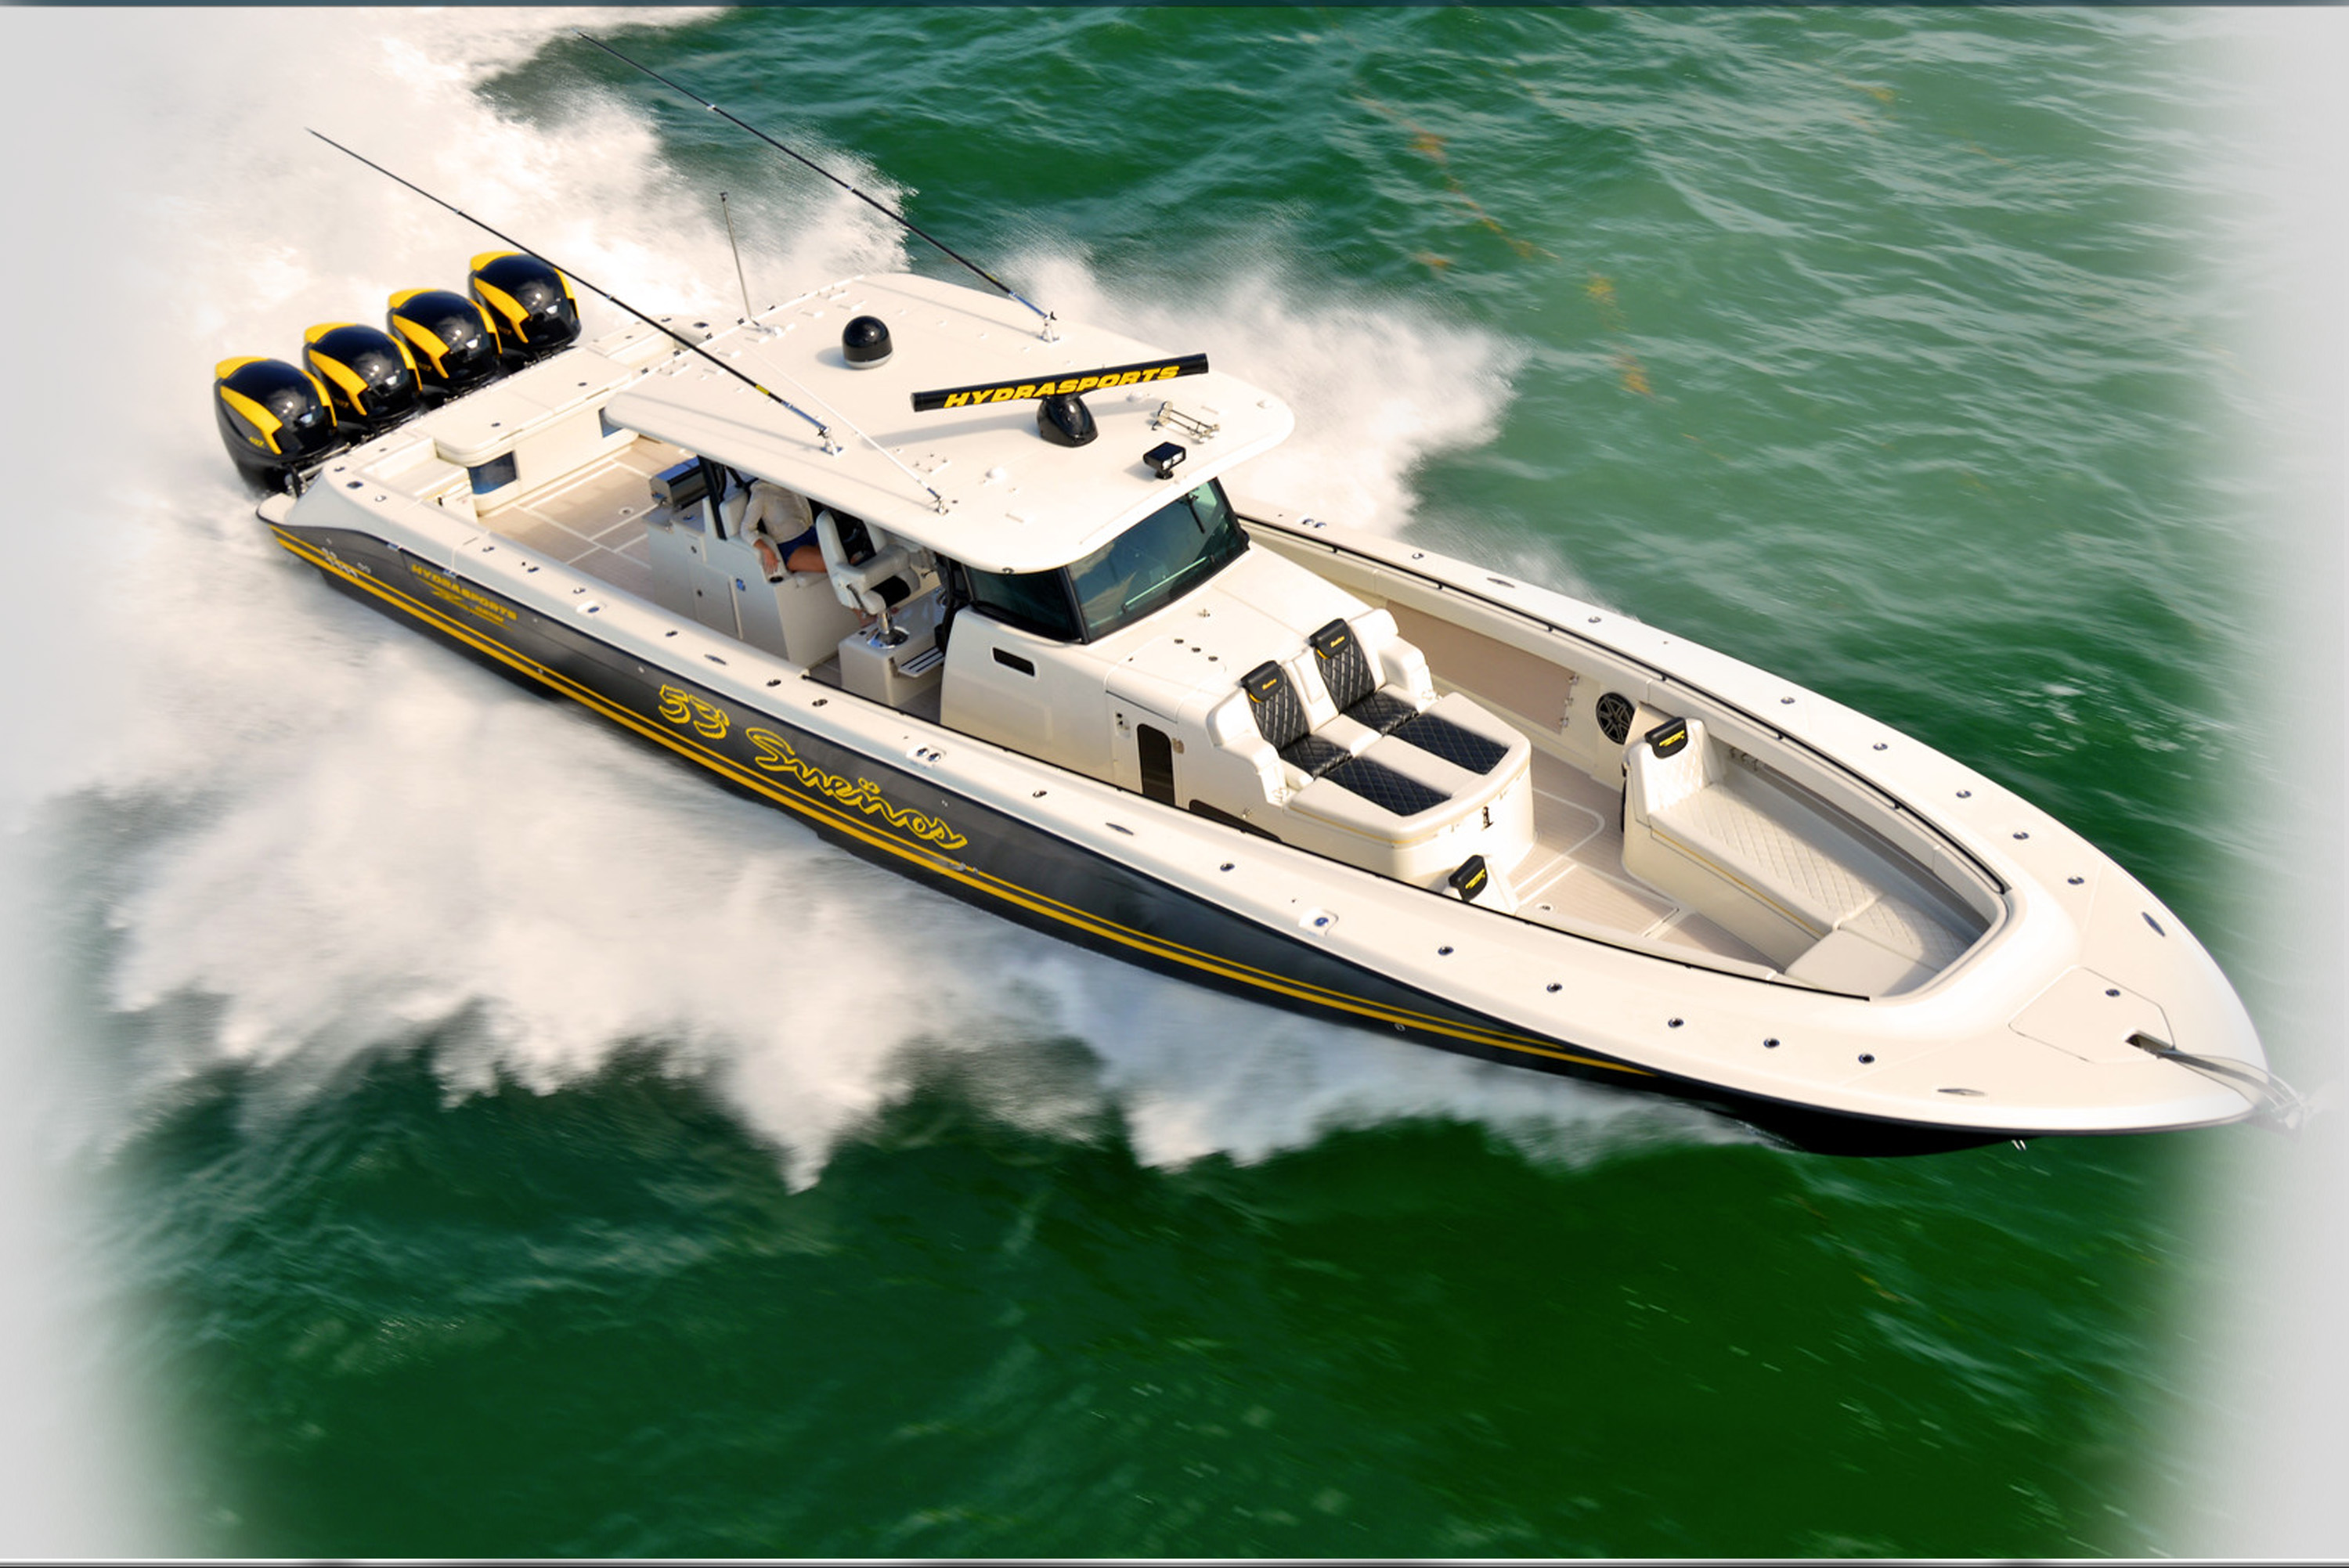 Speed Boat Insanity at Fort Lauderdale More Powerful Outboards, and